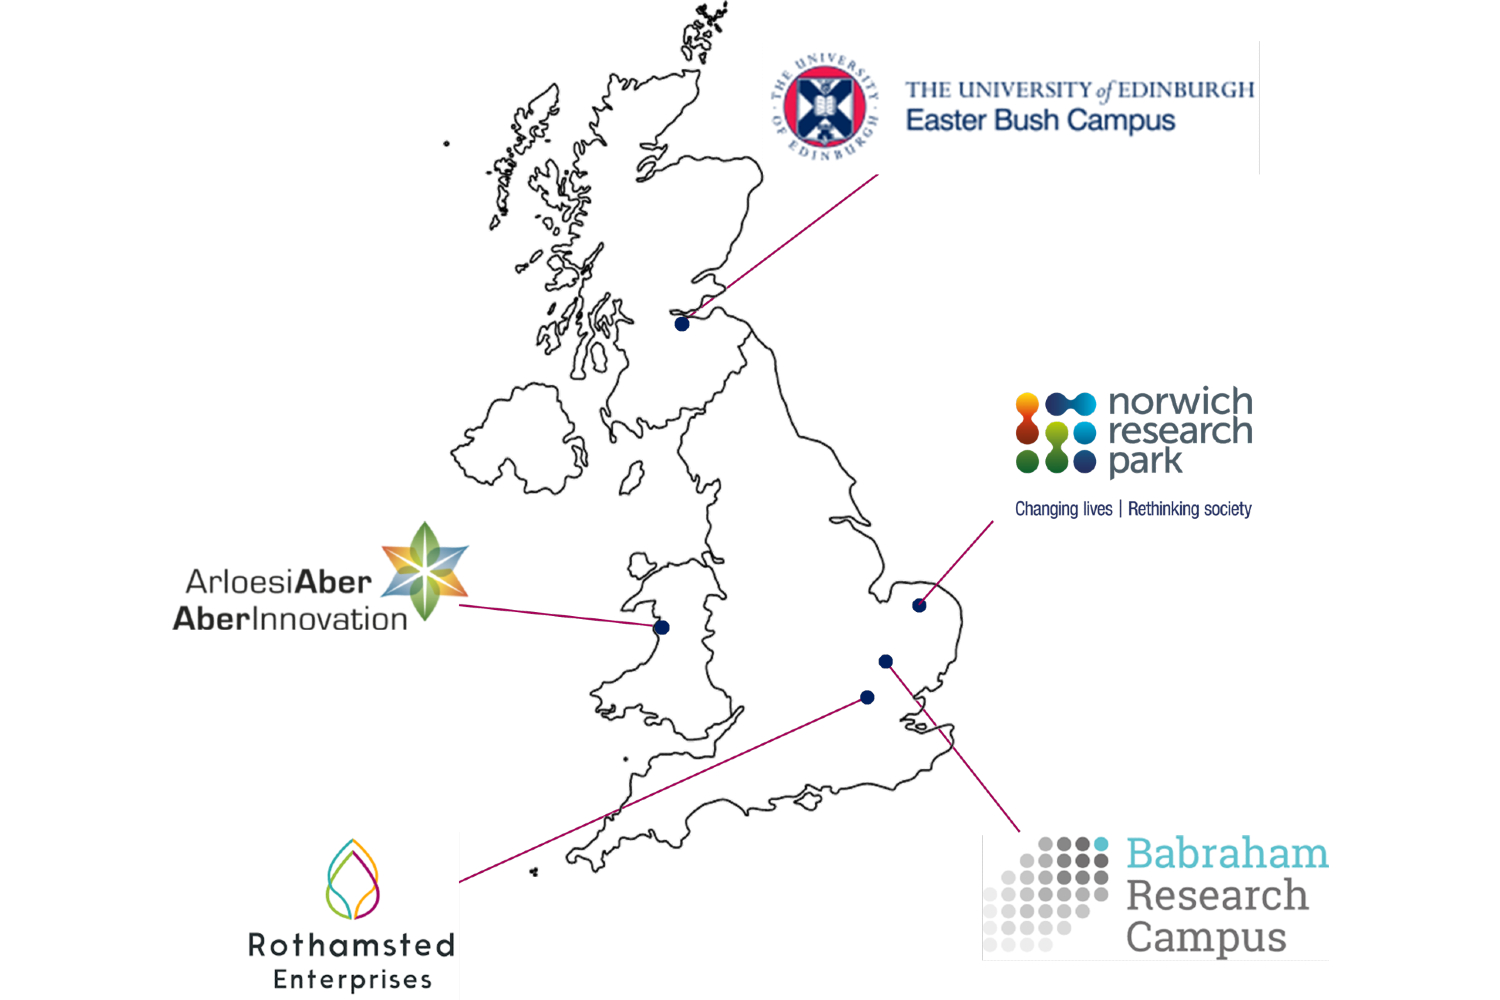 Map of the UK showing the location of BBSRC's research and innovation campuses